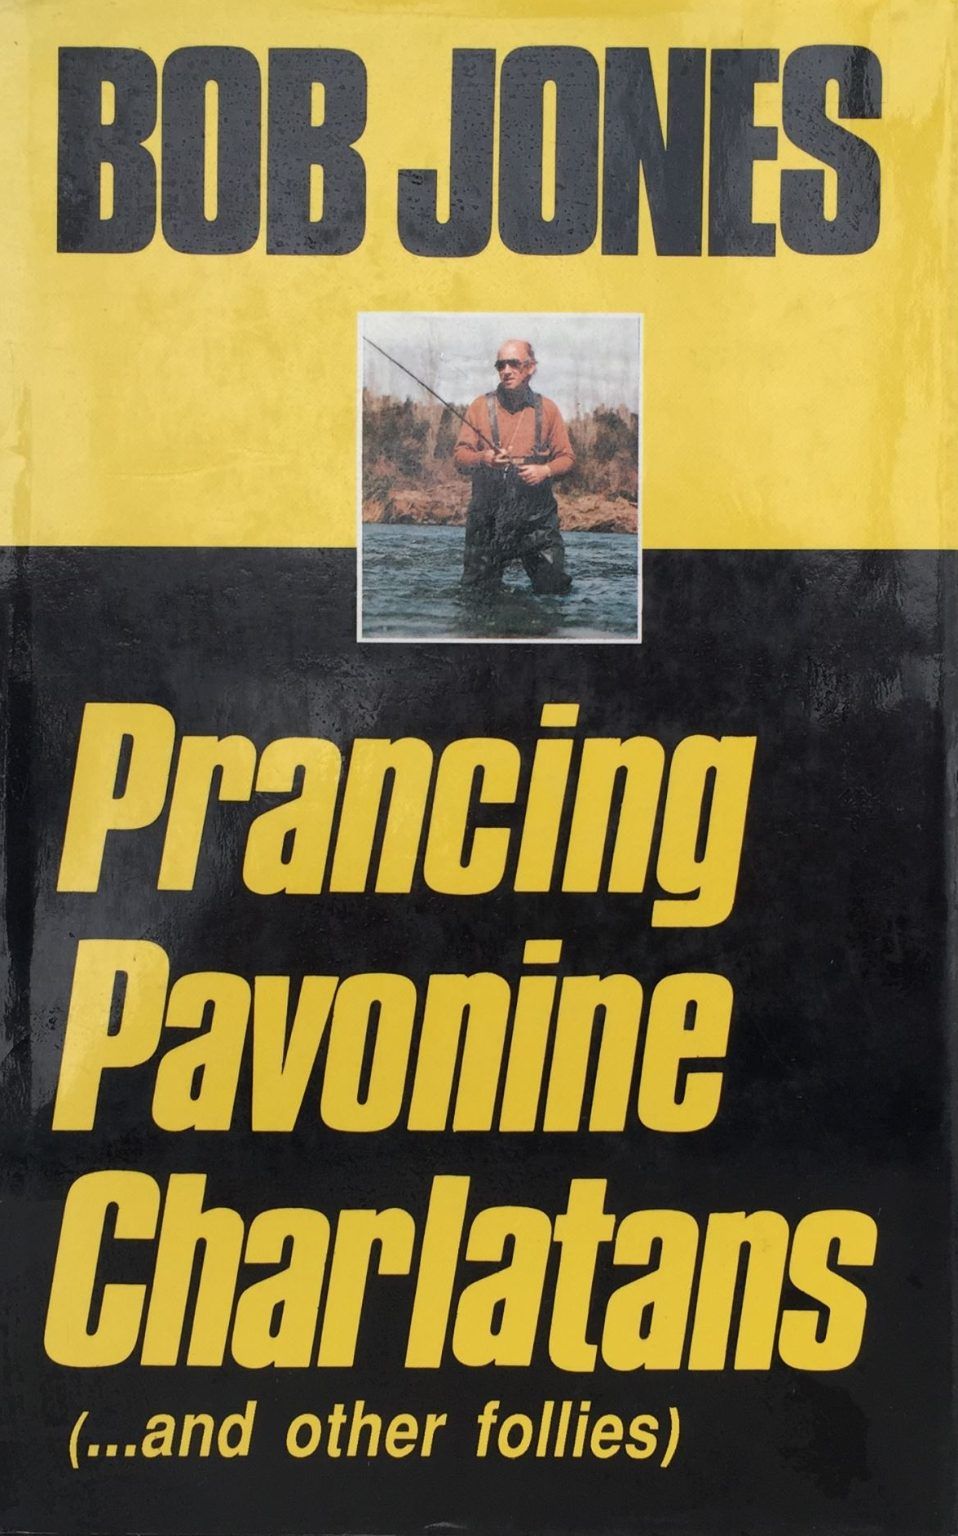 PRANCING PAVONINE CHARLATANS and other follies